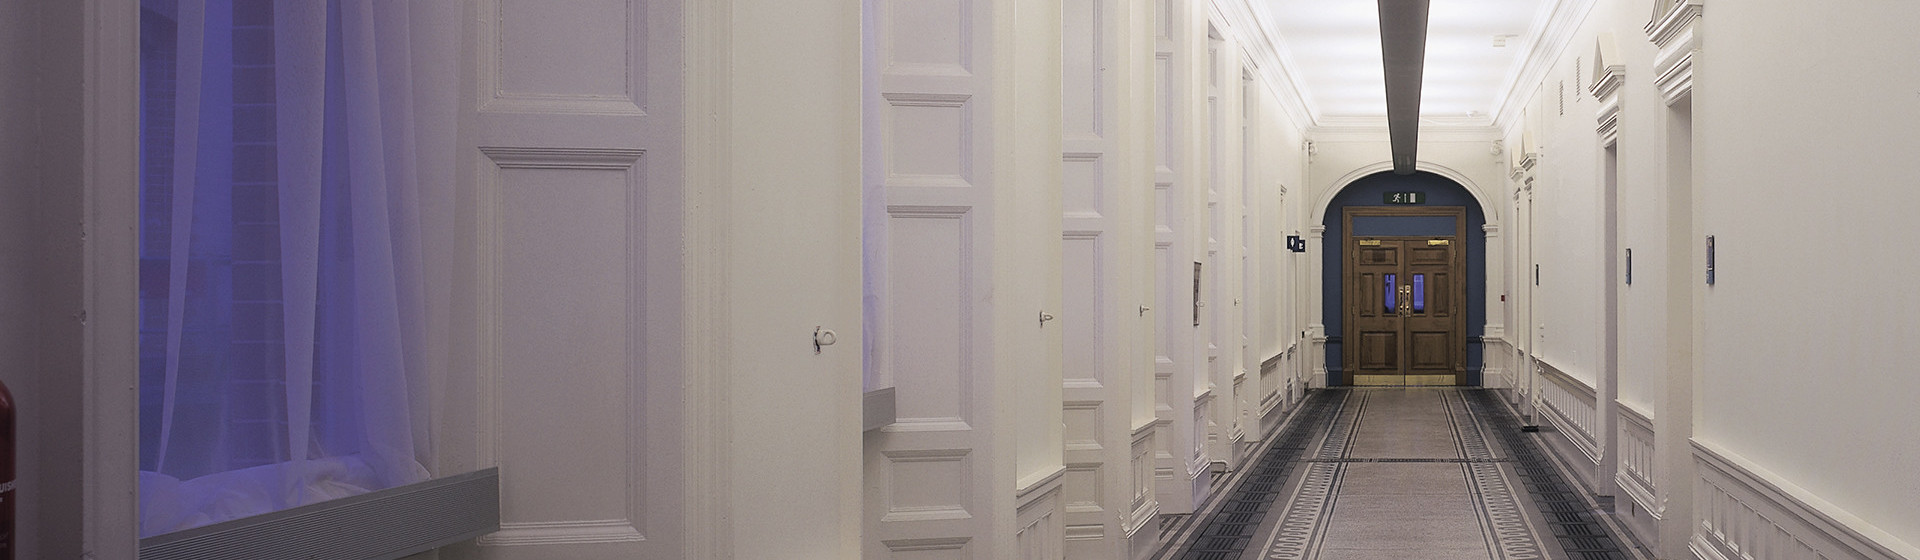 Image for Foreign & Commonwealth Office Corridor